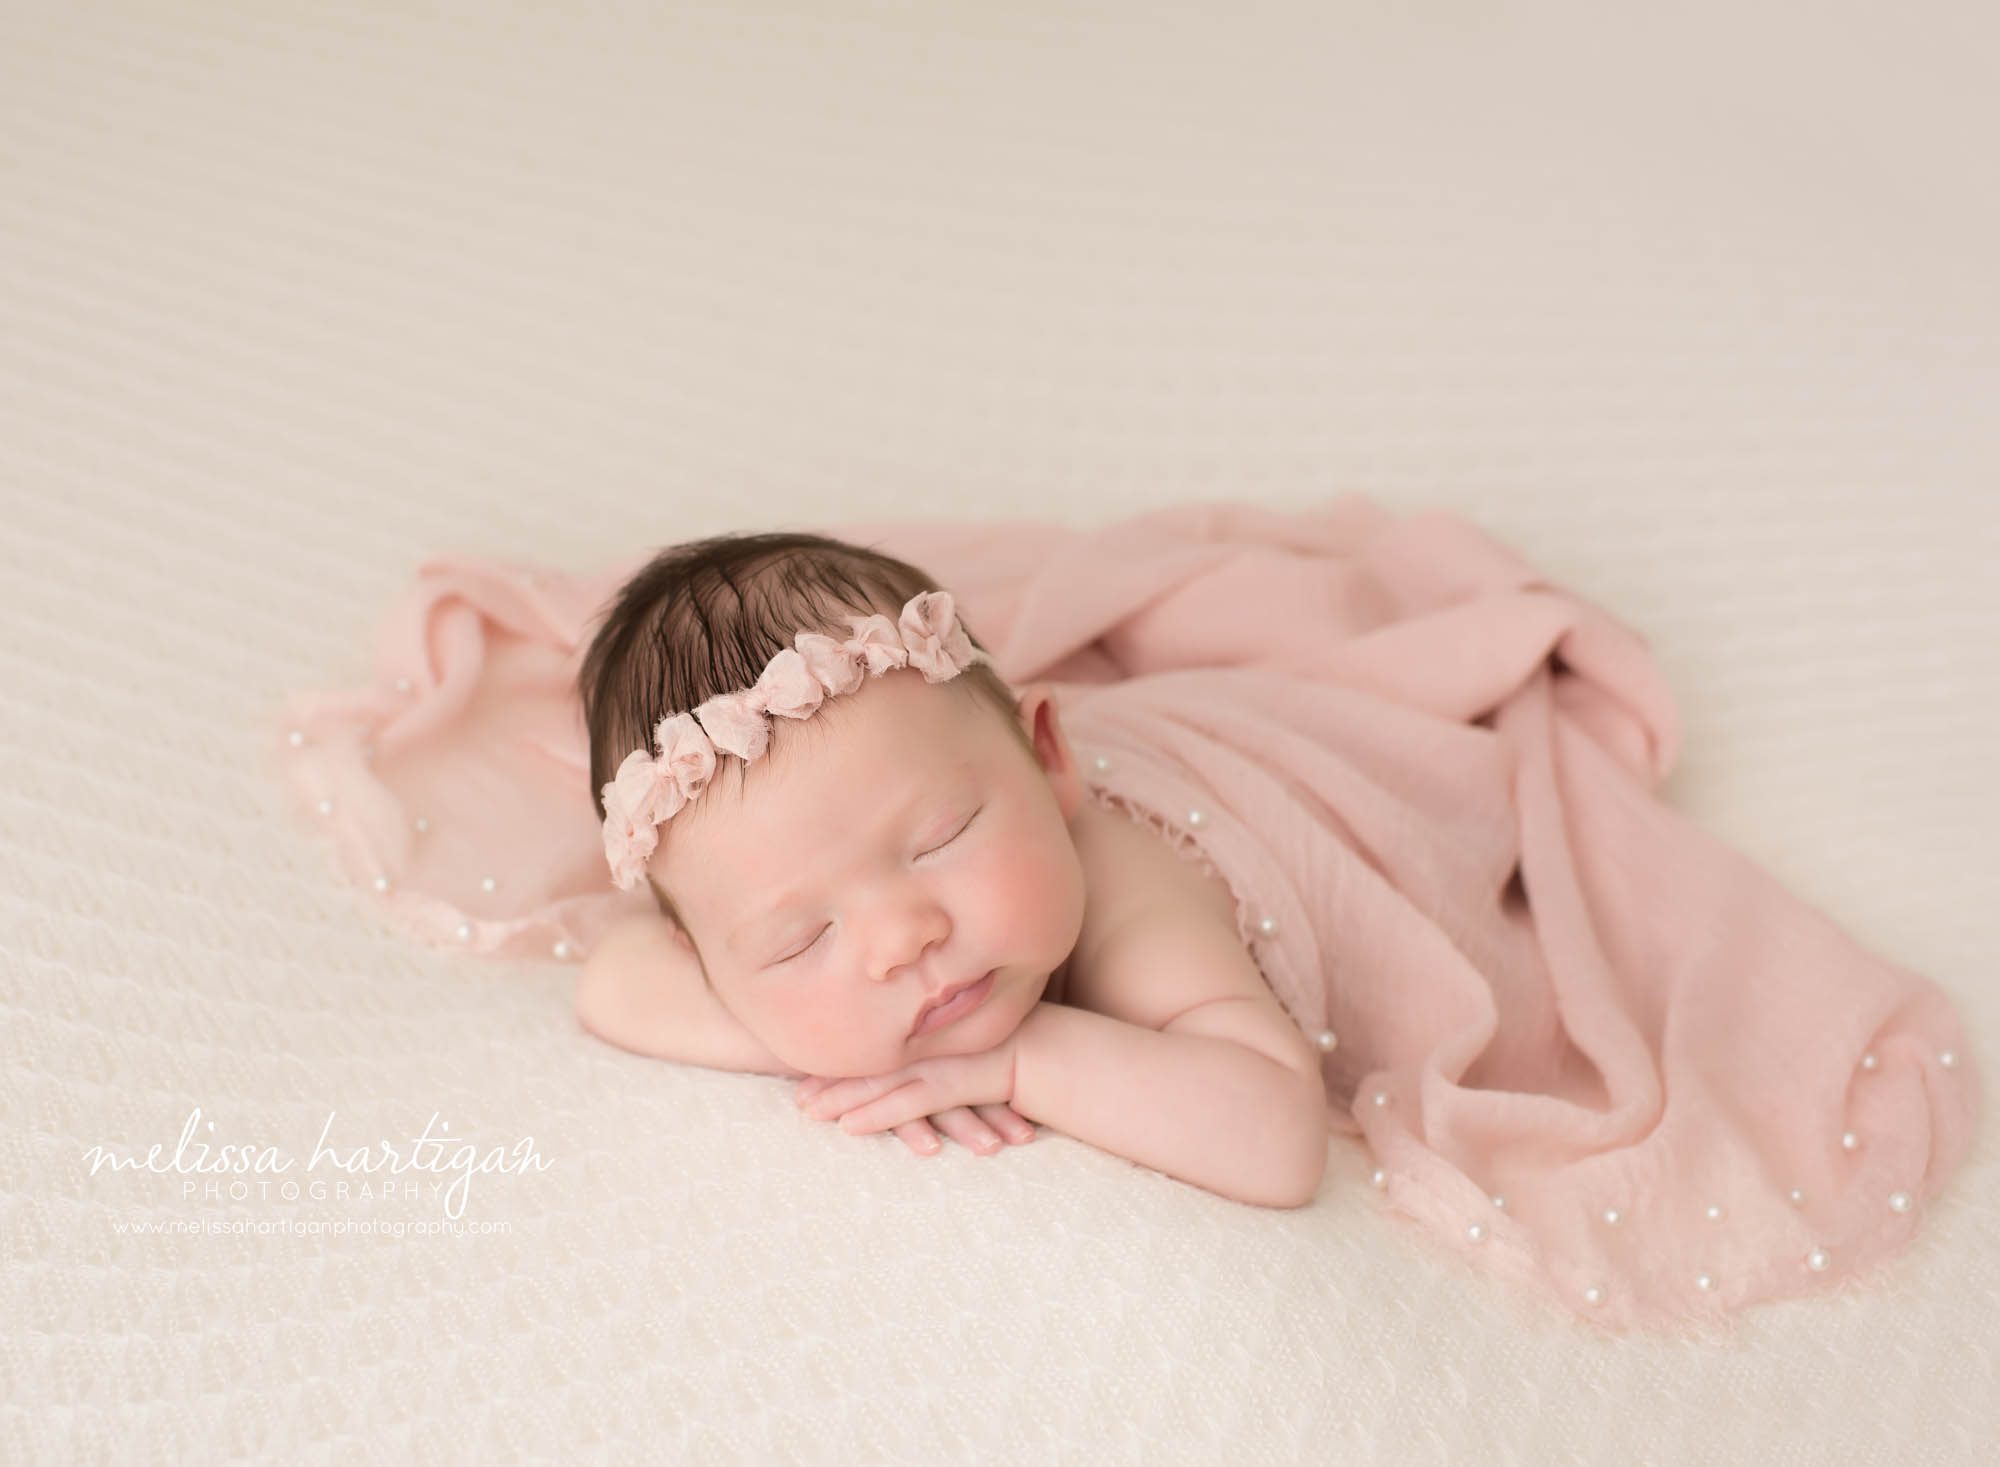 newborn baby girl posed on tummy with pink wrap draped over her back wearing bow headband